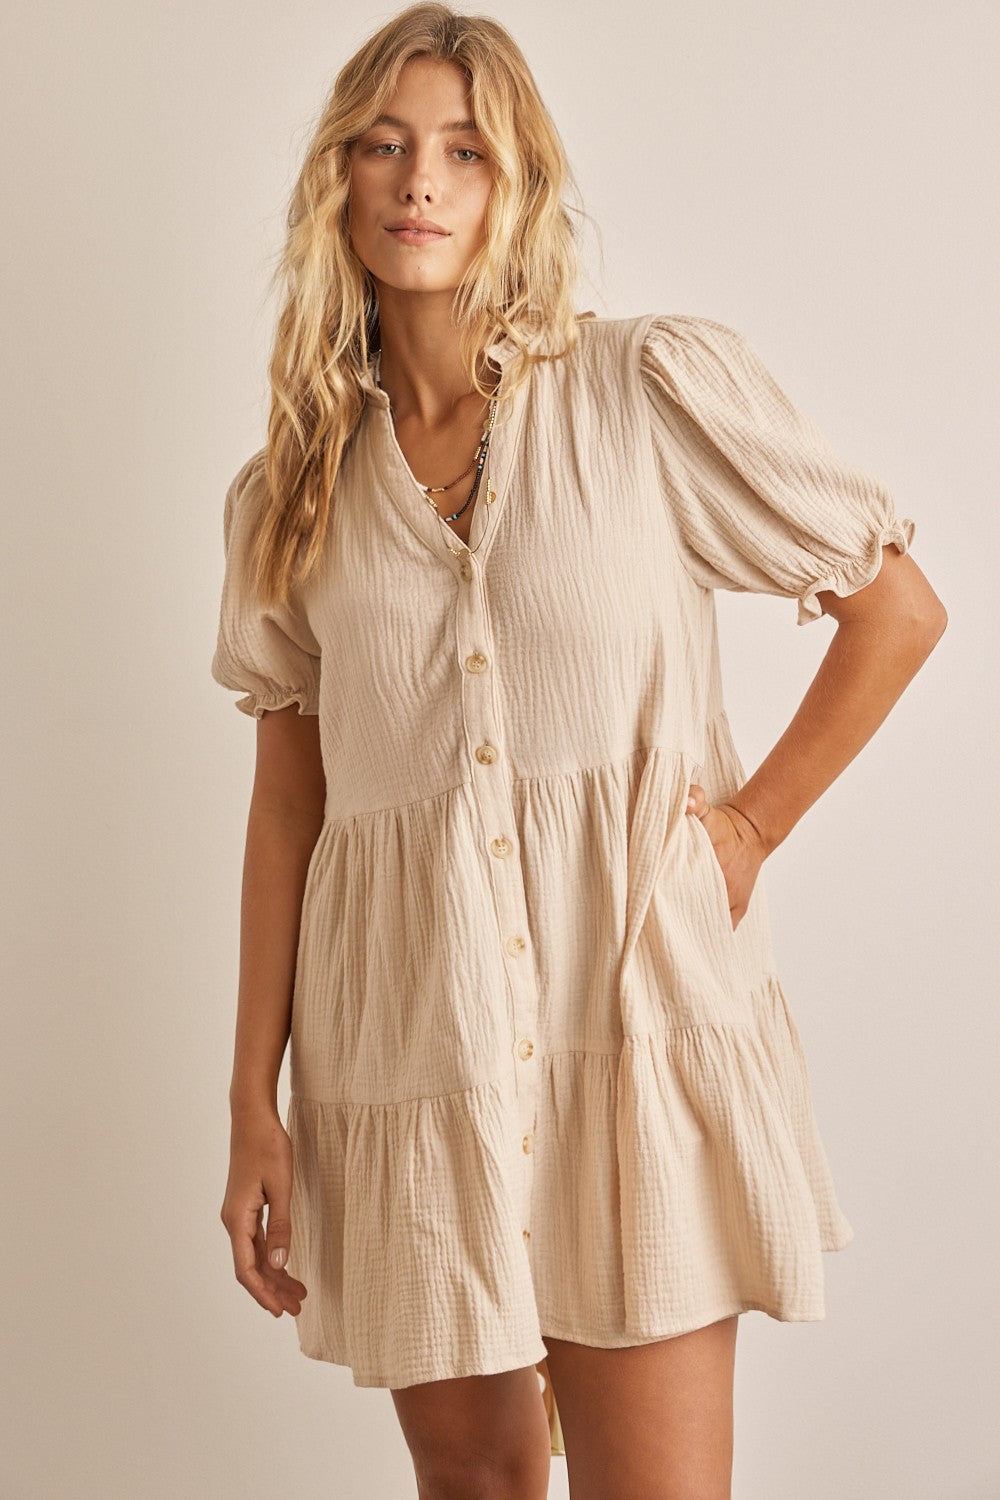 In February Button Down Tiered Dress in Natural Dress In February   